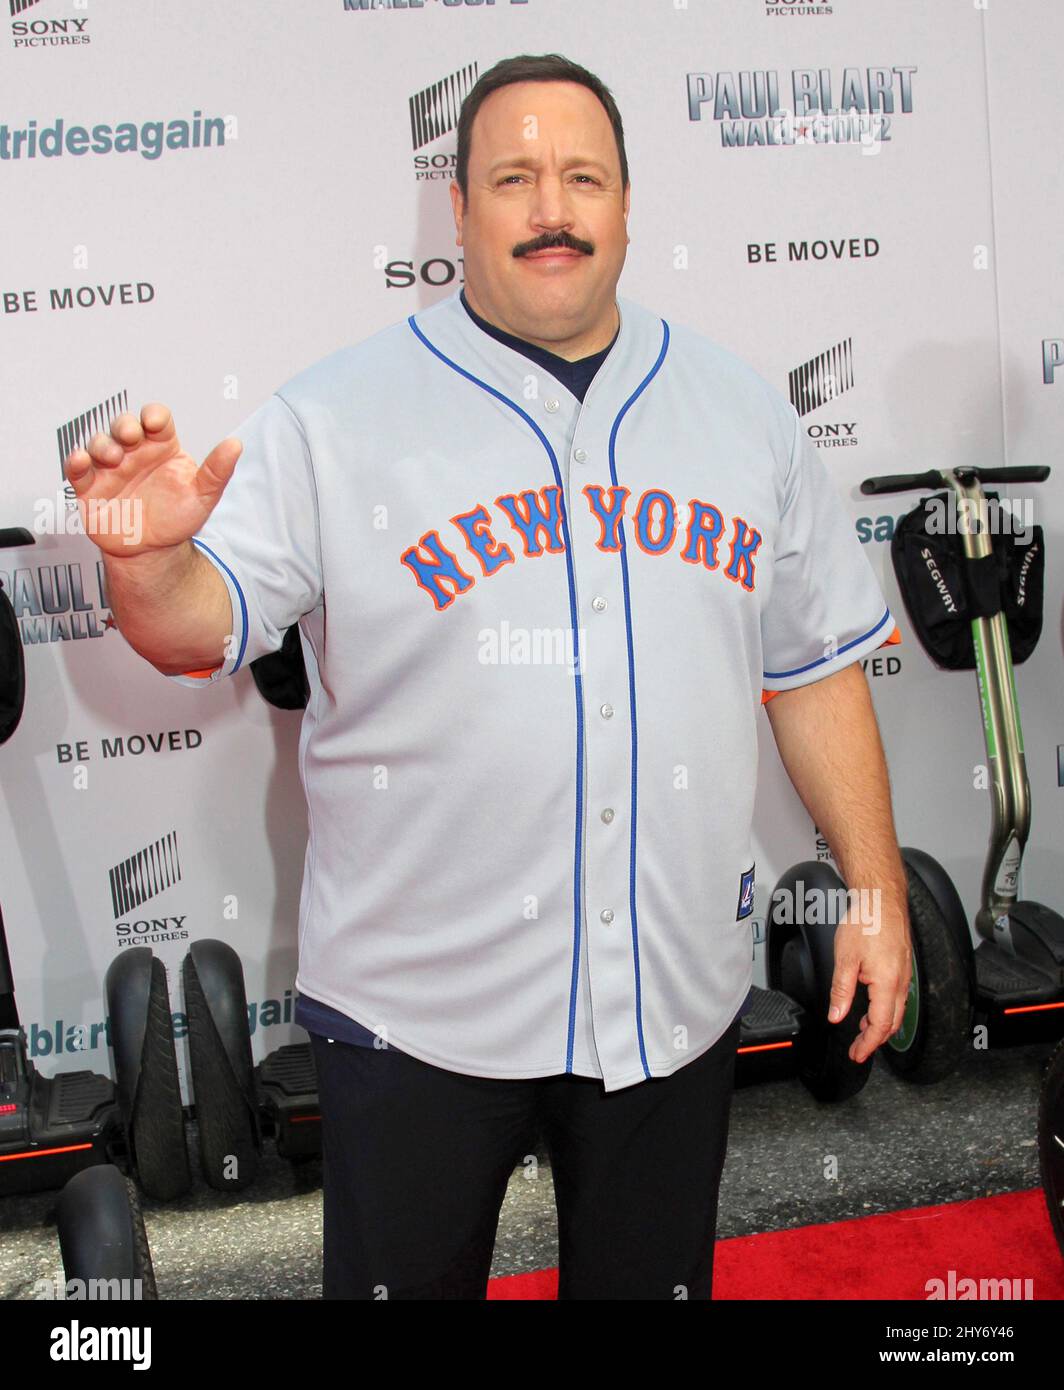 Kevin James attending the 'Paul Blart: Mall Cop 2' held at the AMC Loews Lincoln Square Theater in New York, USA. Stock Photo